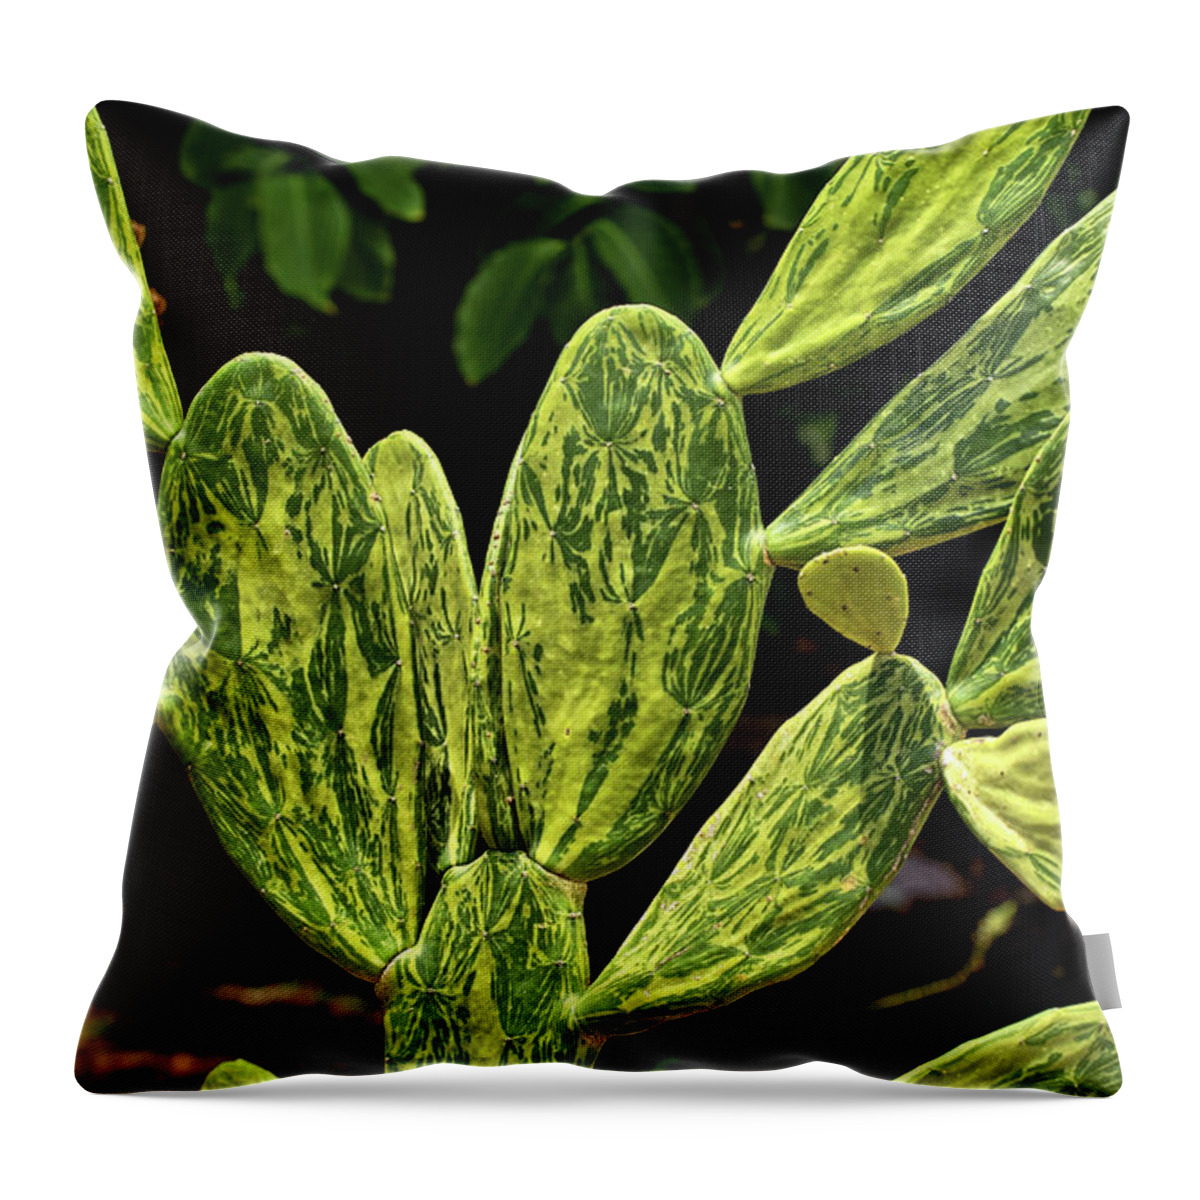 Cactus Patterns Throw Pillow featuring the photograph Cactus Patterns by Richard Goldman